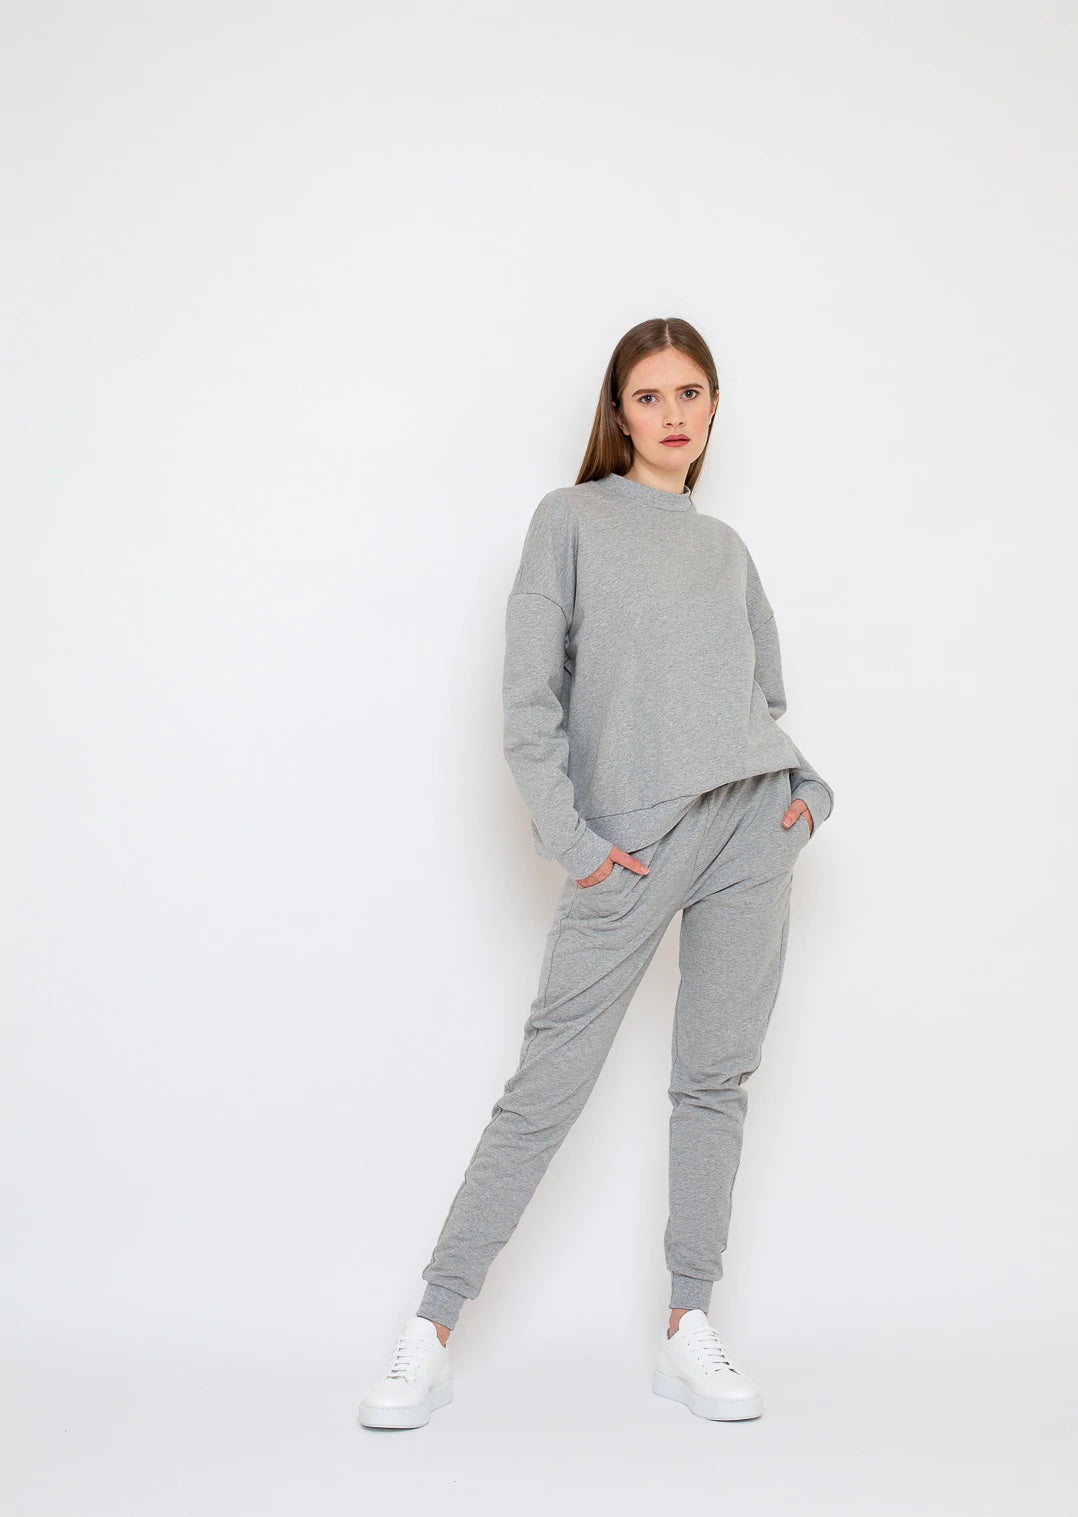 Woman wearing the Zoe Sweatpants sewing pattern from Bara Studio on The Fold Line. A sweatpants pattern made in medium-weight stretch fabrics such as sweat or French terry fabrics, featuring in-seam pockets, gently tapered legs, plus ribbing at the waistb